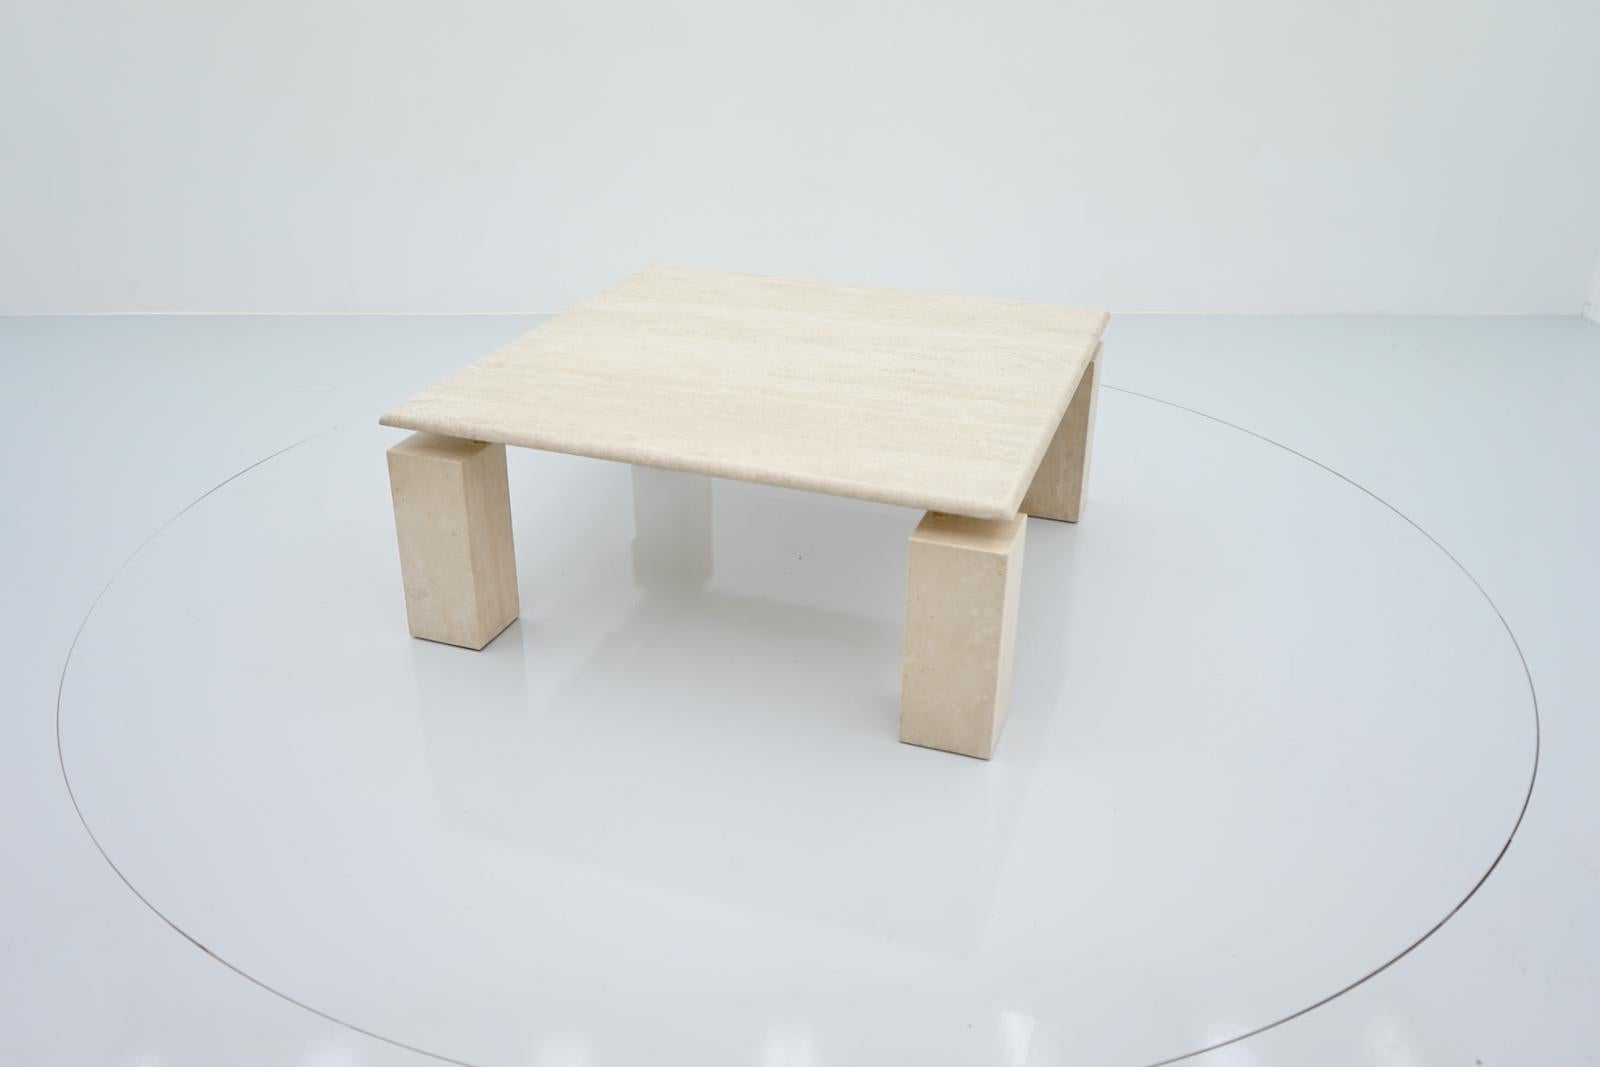 Square Coffee Table in Italian Travertine with Floating Table Top, 1970s For Sale 2